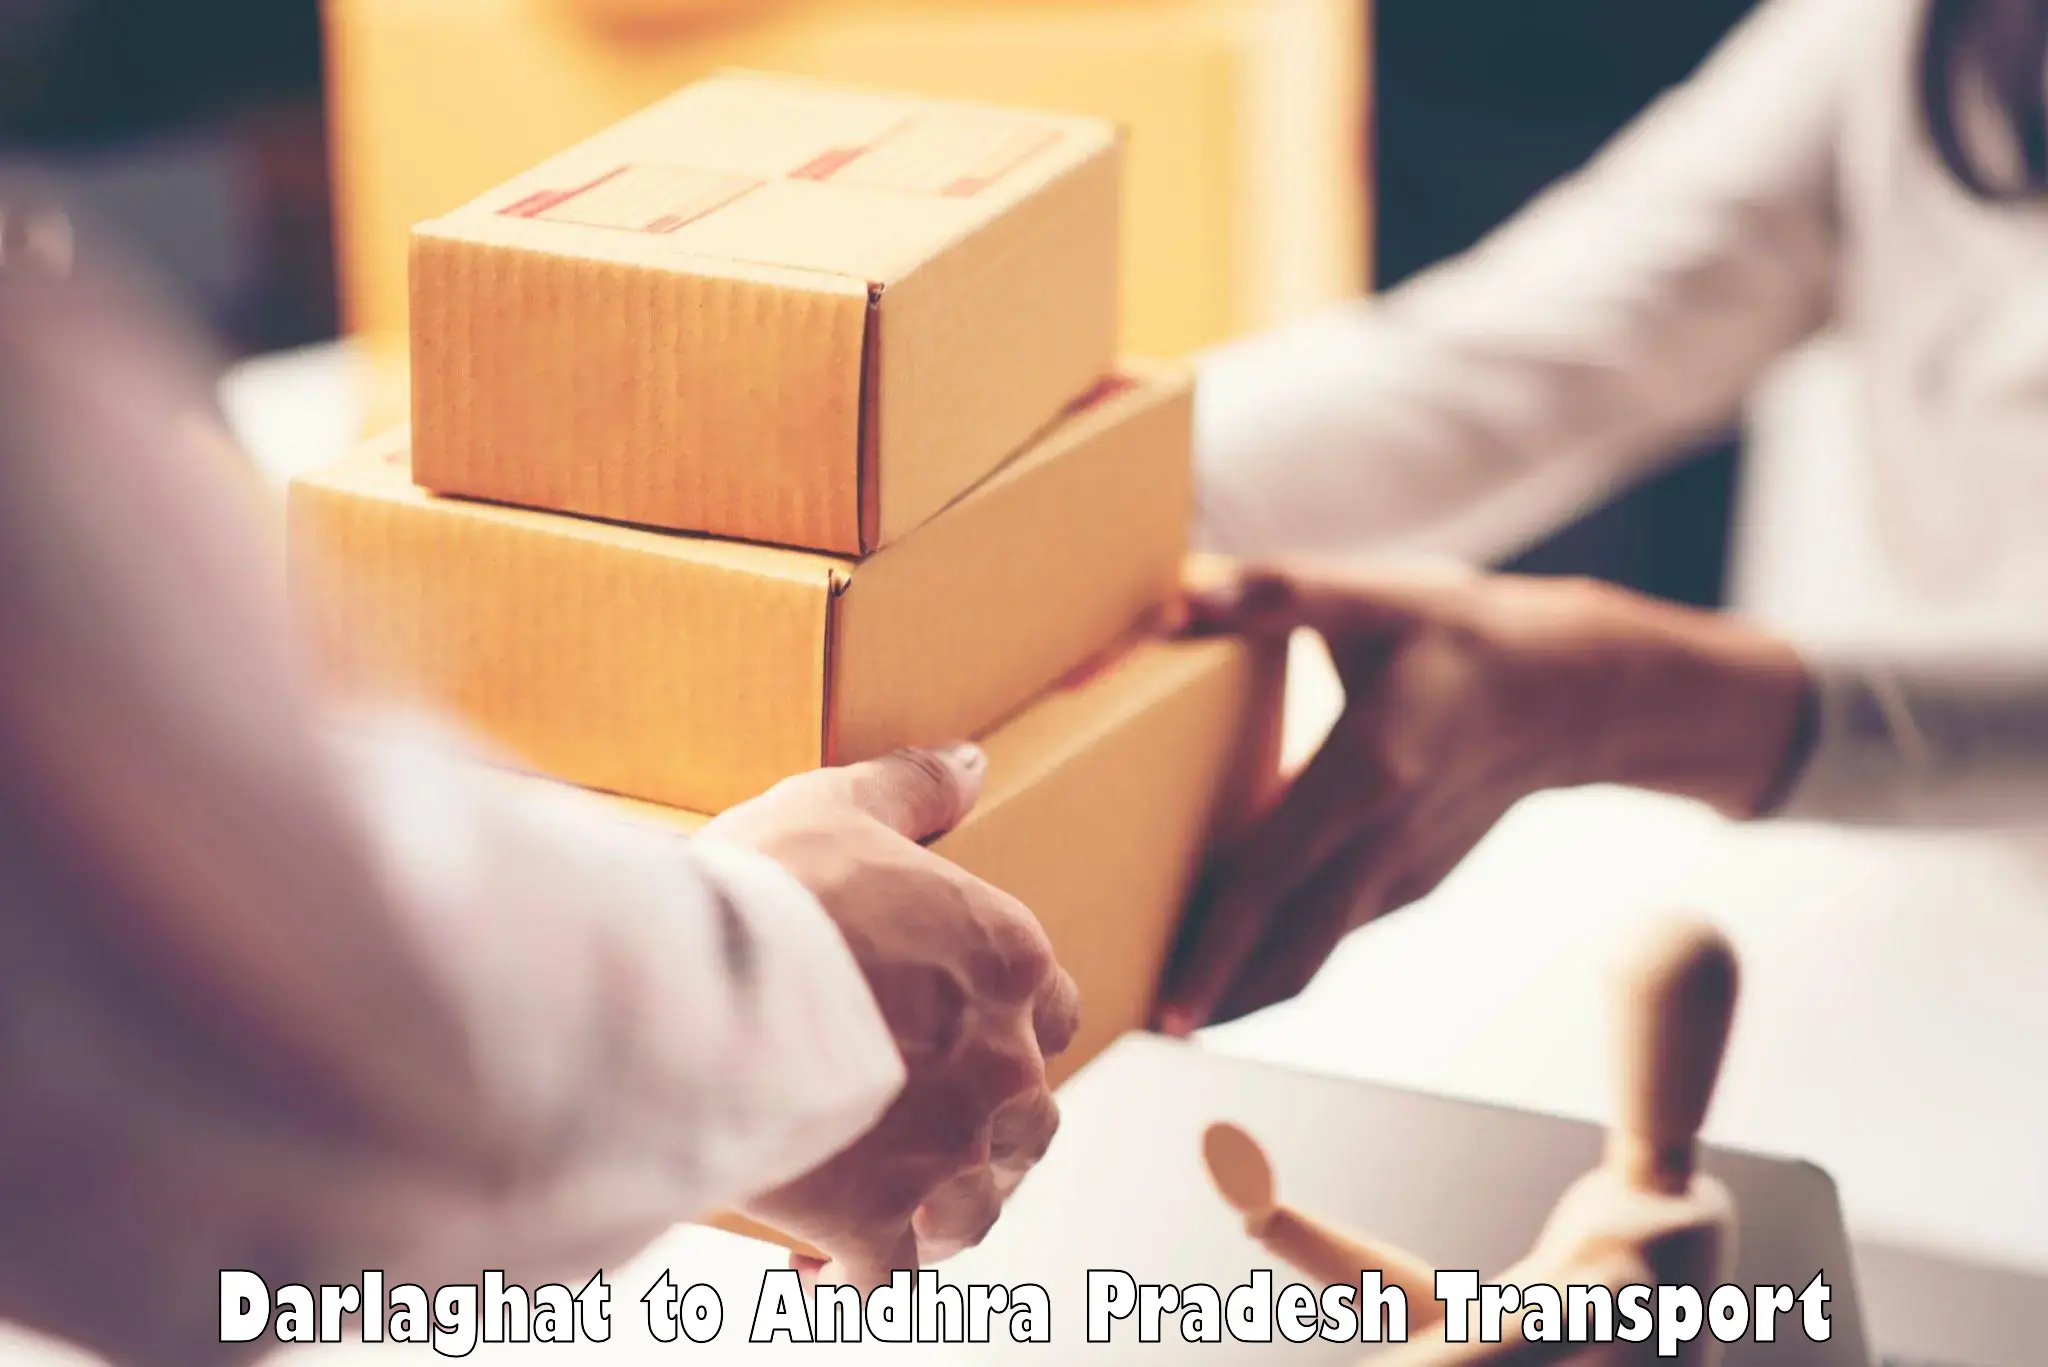 Truck transport companies in India Darlaghat to Proddatur